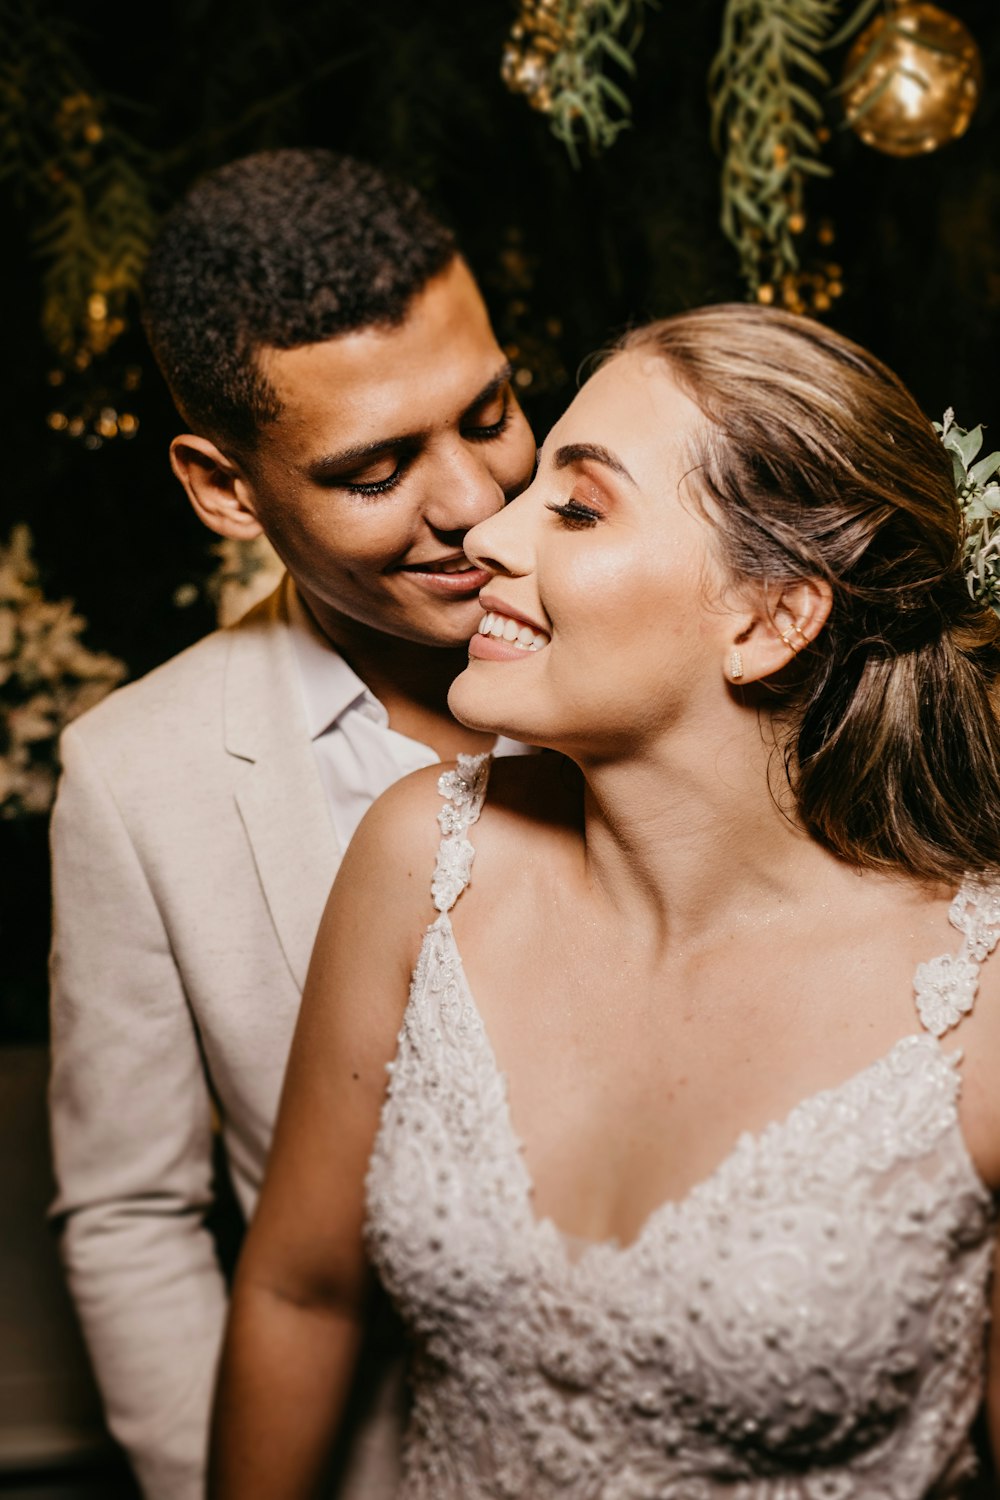 woman in white floral lace wedding dress smiling beside man in gray suit